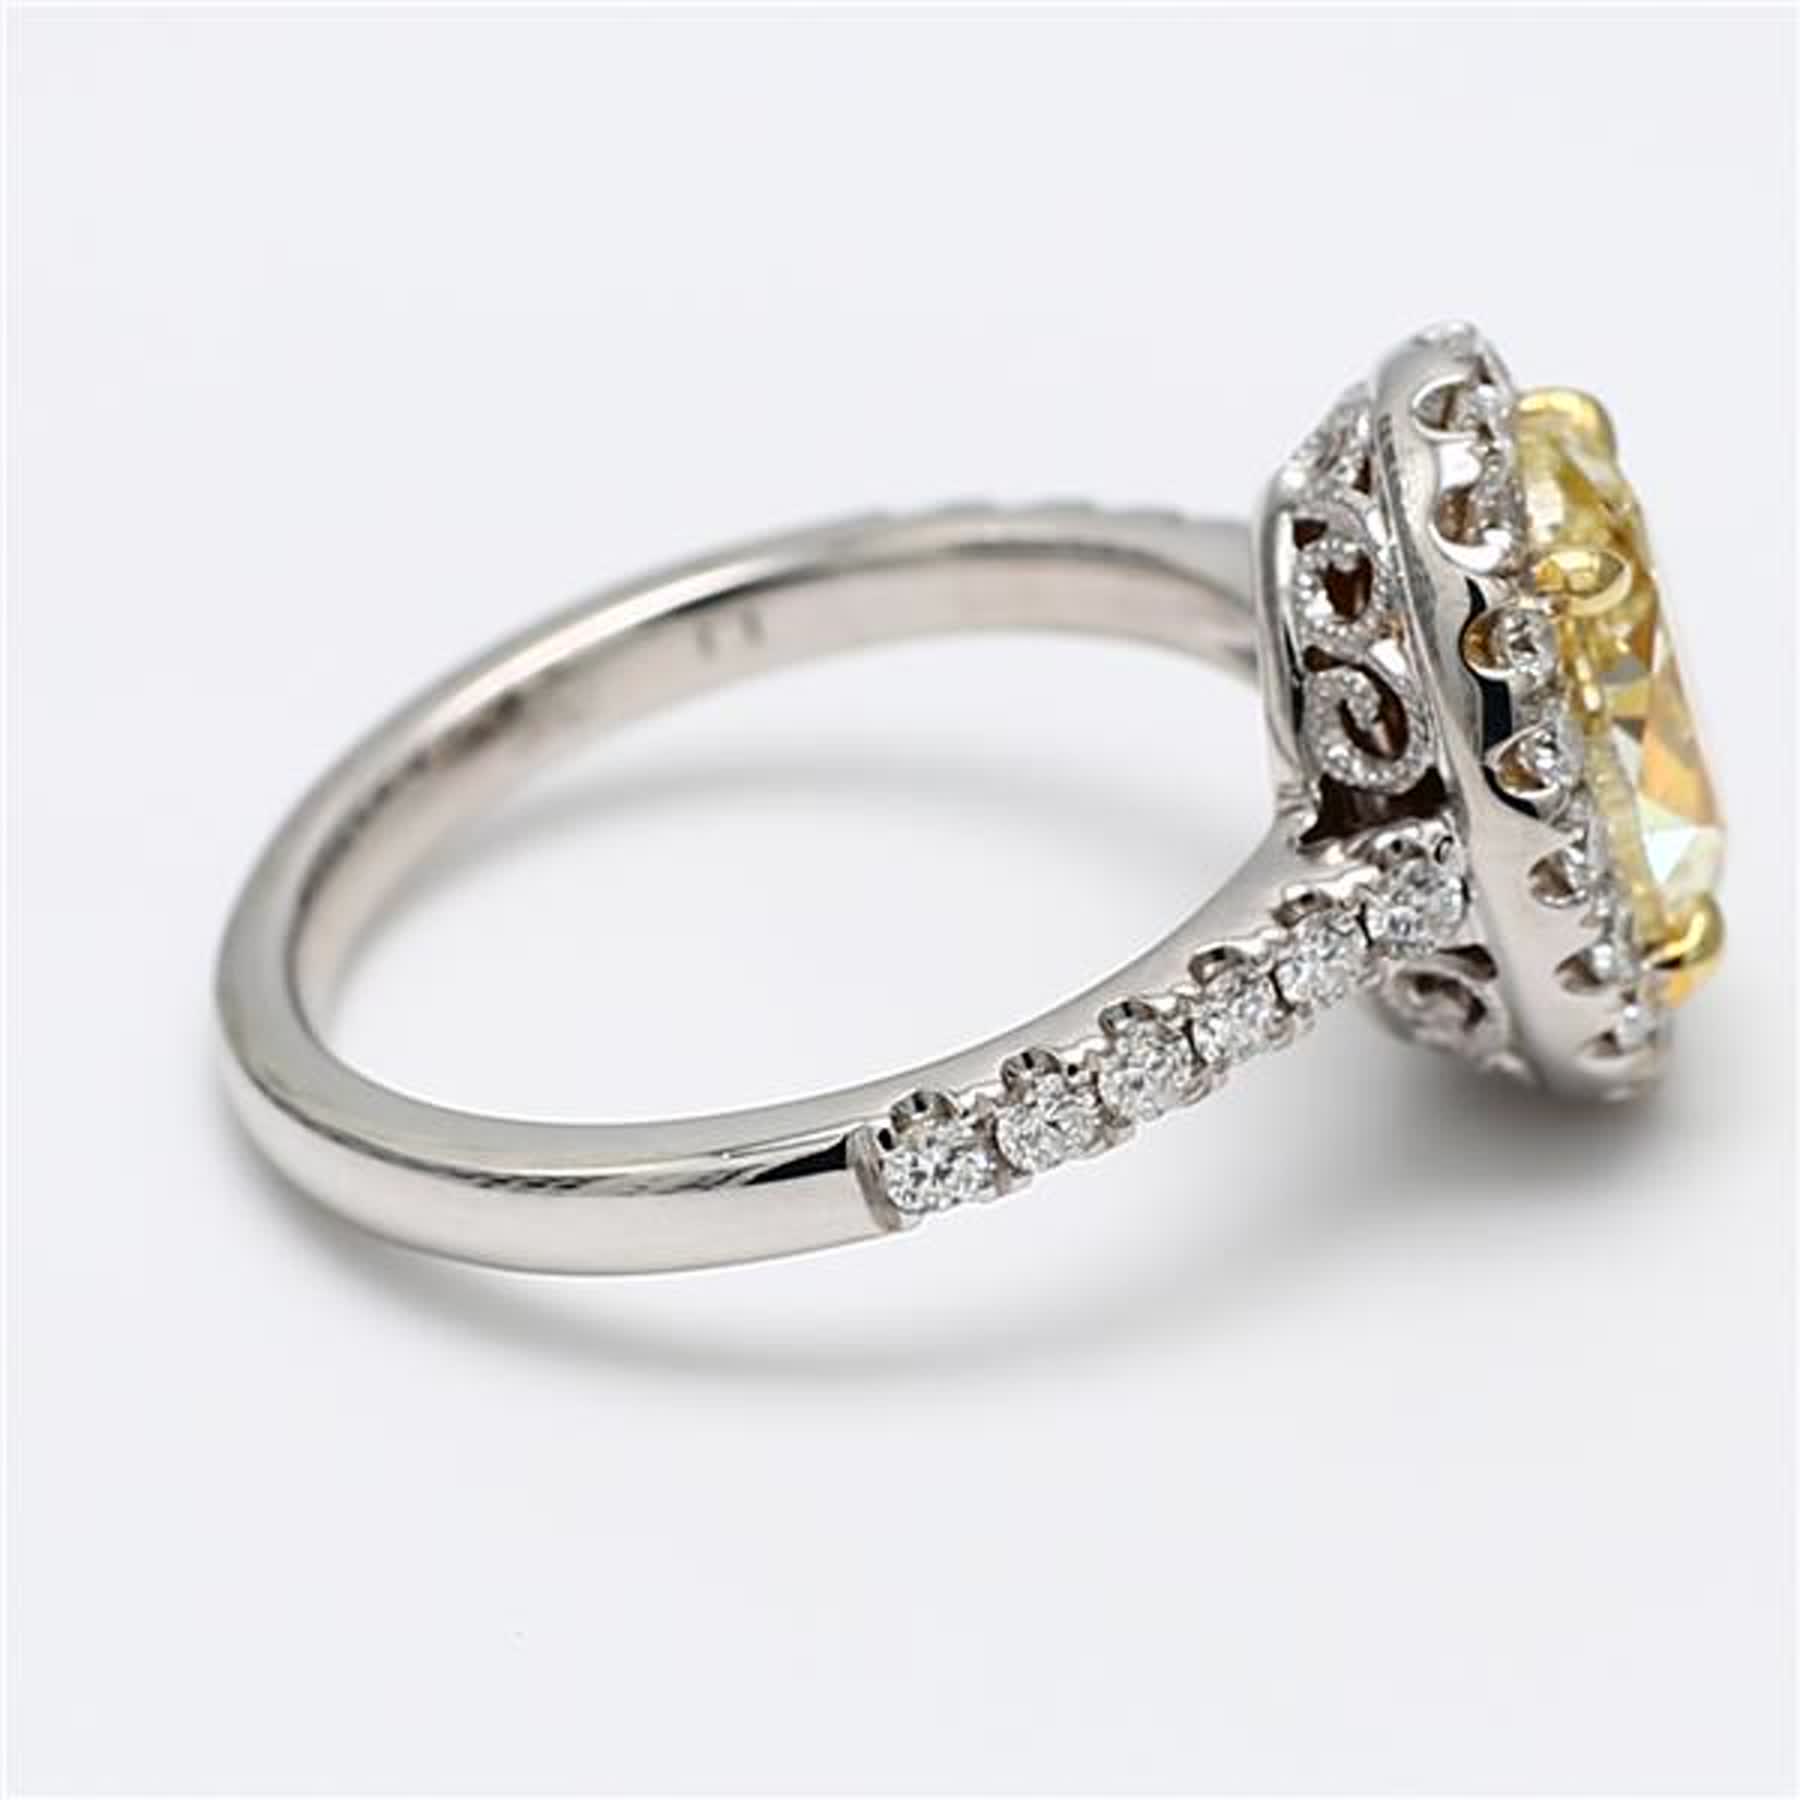 GIA Certified Natural Yellow Oval and White Diamond 3.11 Carat TW Platinum Ring